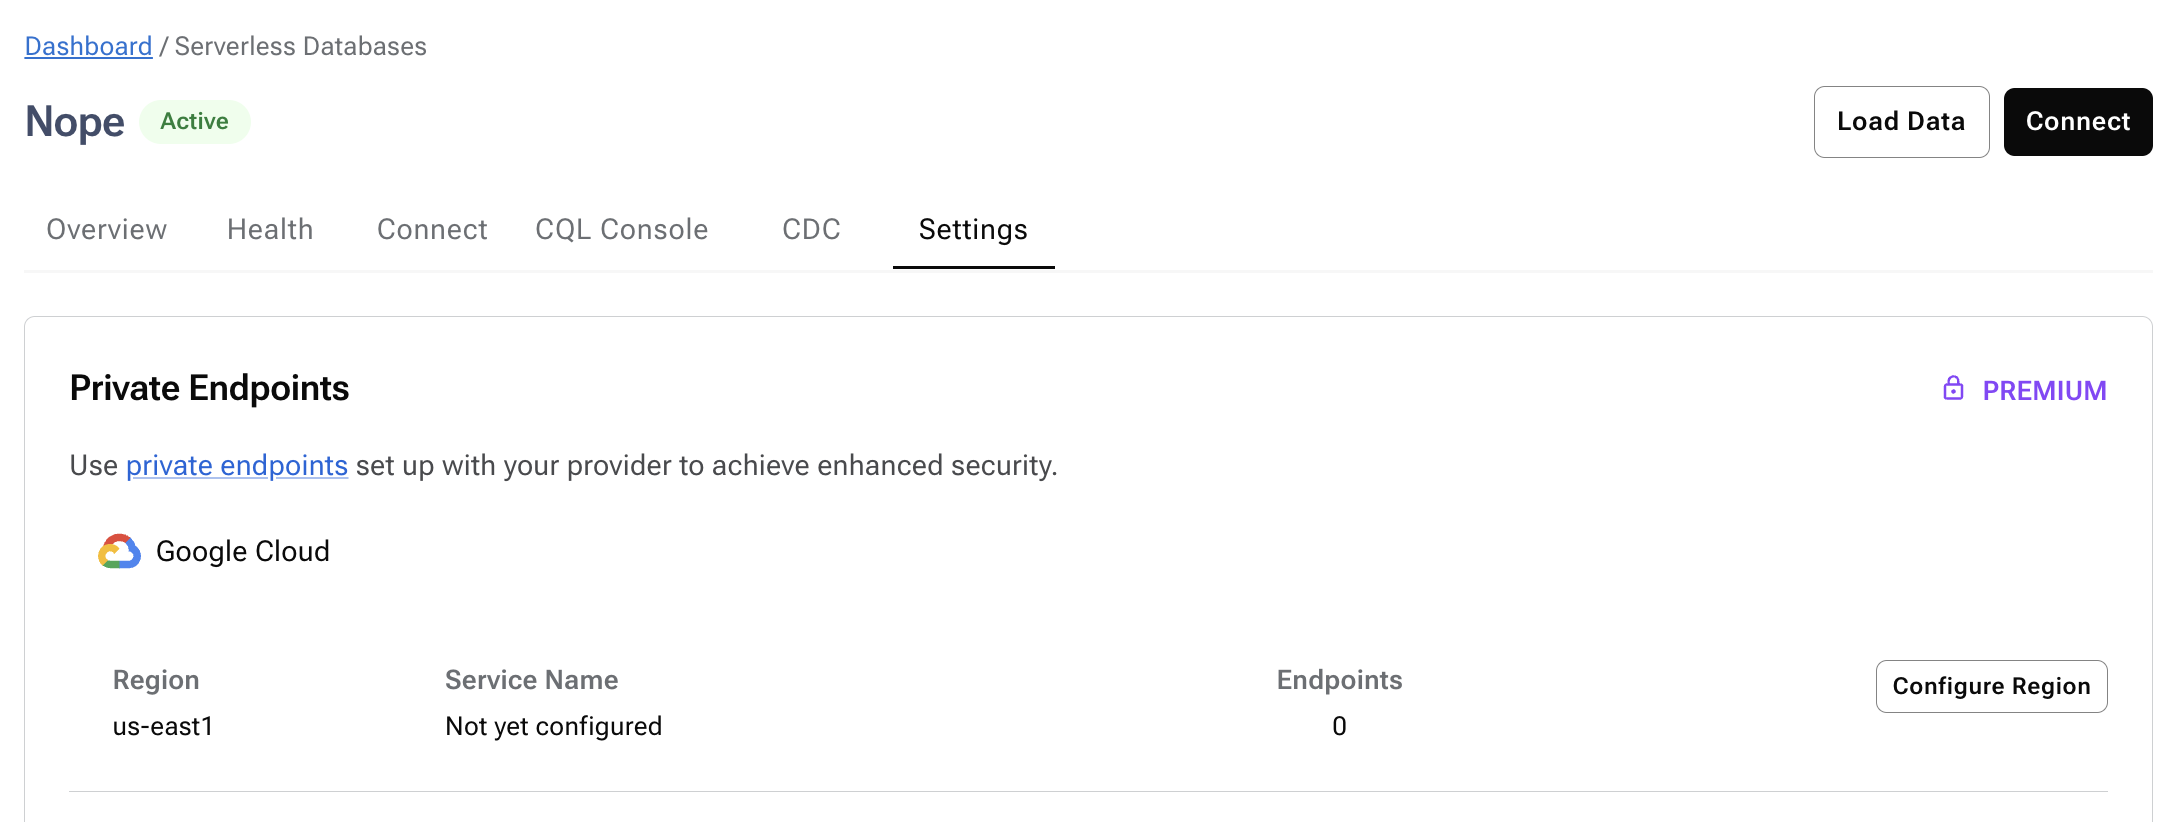 Astra Portal Settings tab with Private Endpoints section